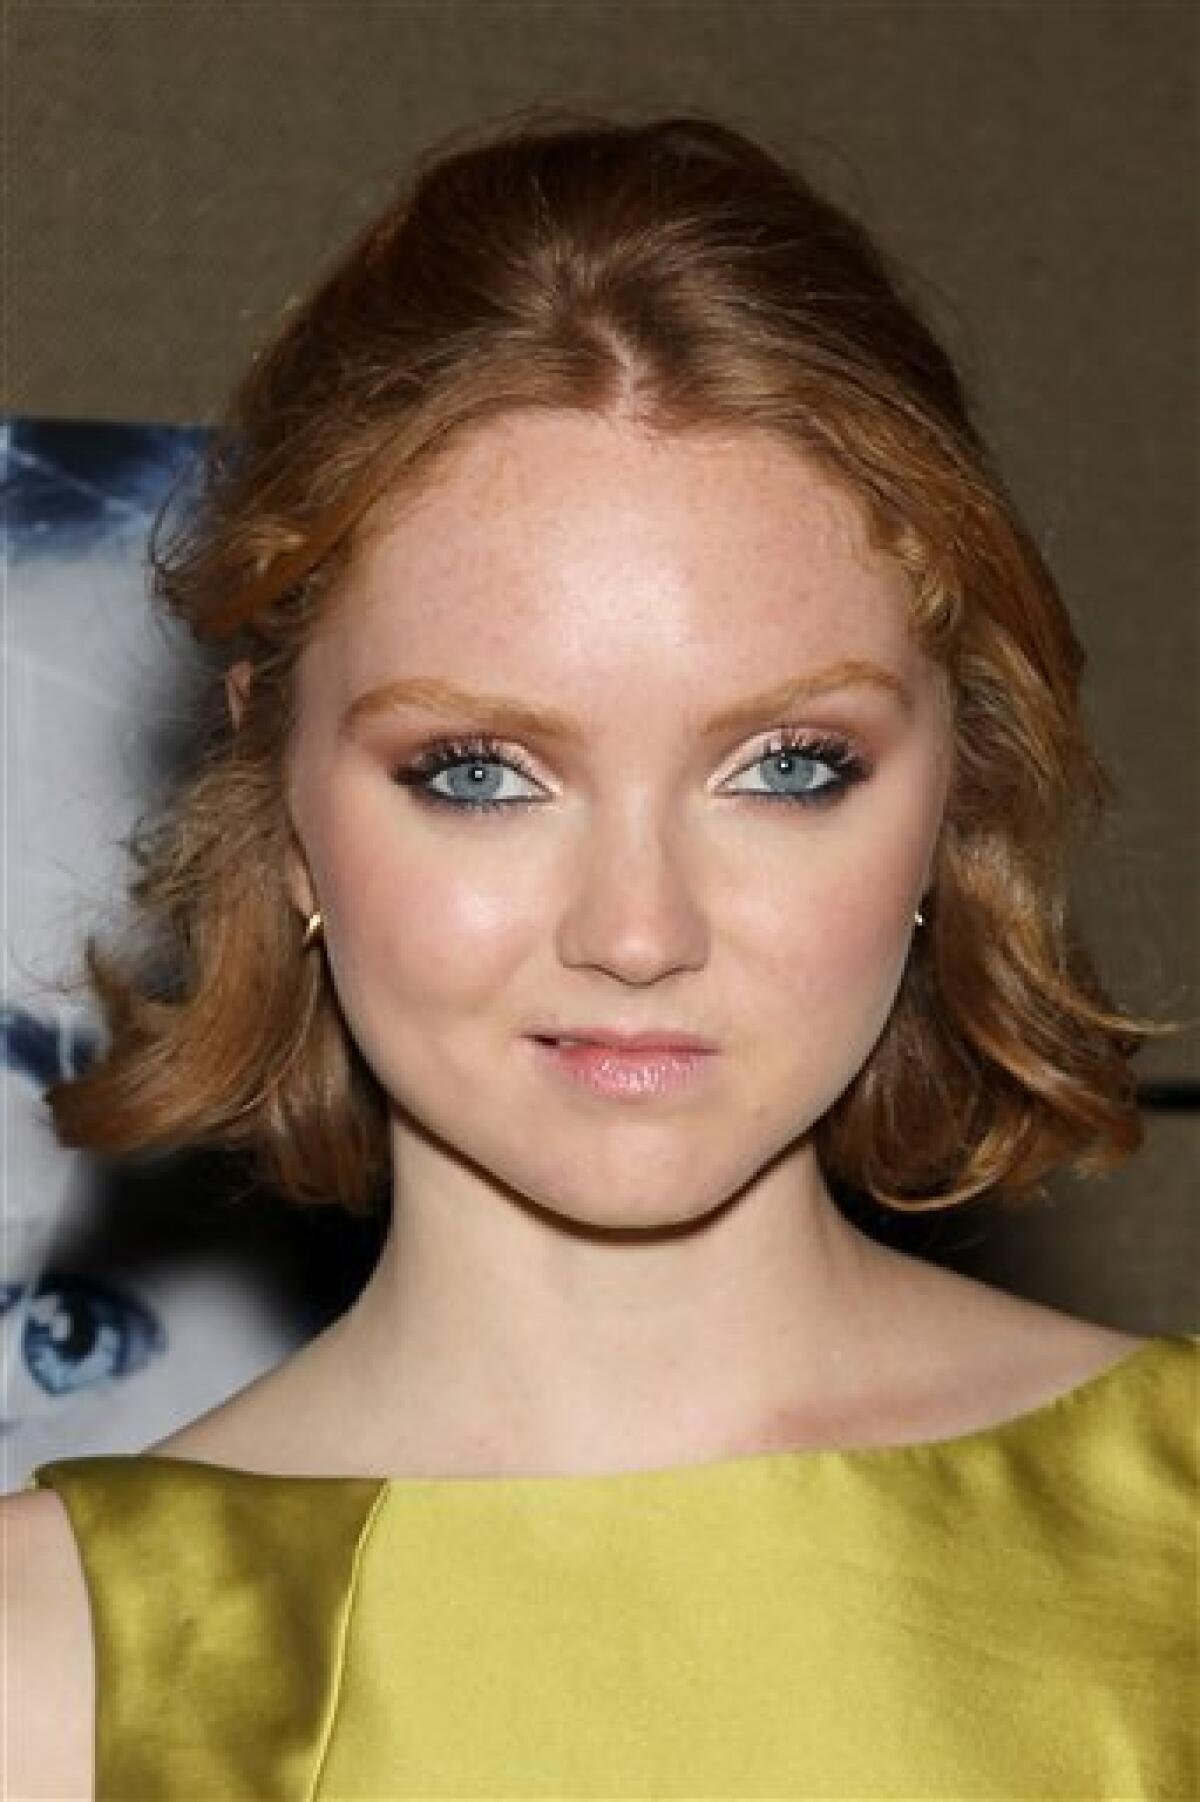 In this April 11, 2012 photo, actress Lily Cole is shown at the premiere of the IFC film "The Moth Diaries" at the Tribeca Grand Hotel Screening Room in New York. The successful model -actress launched an eco-friendly clothing line, has two upcoming films and a new television series in the works. (AP Photo/Starpix, Marion Curtis)